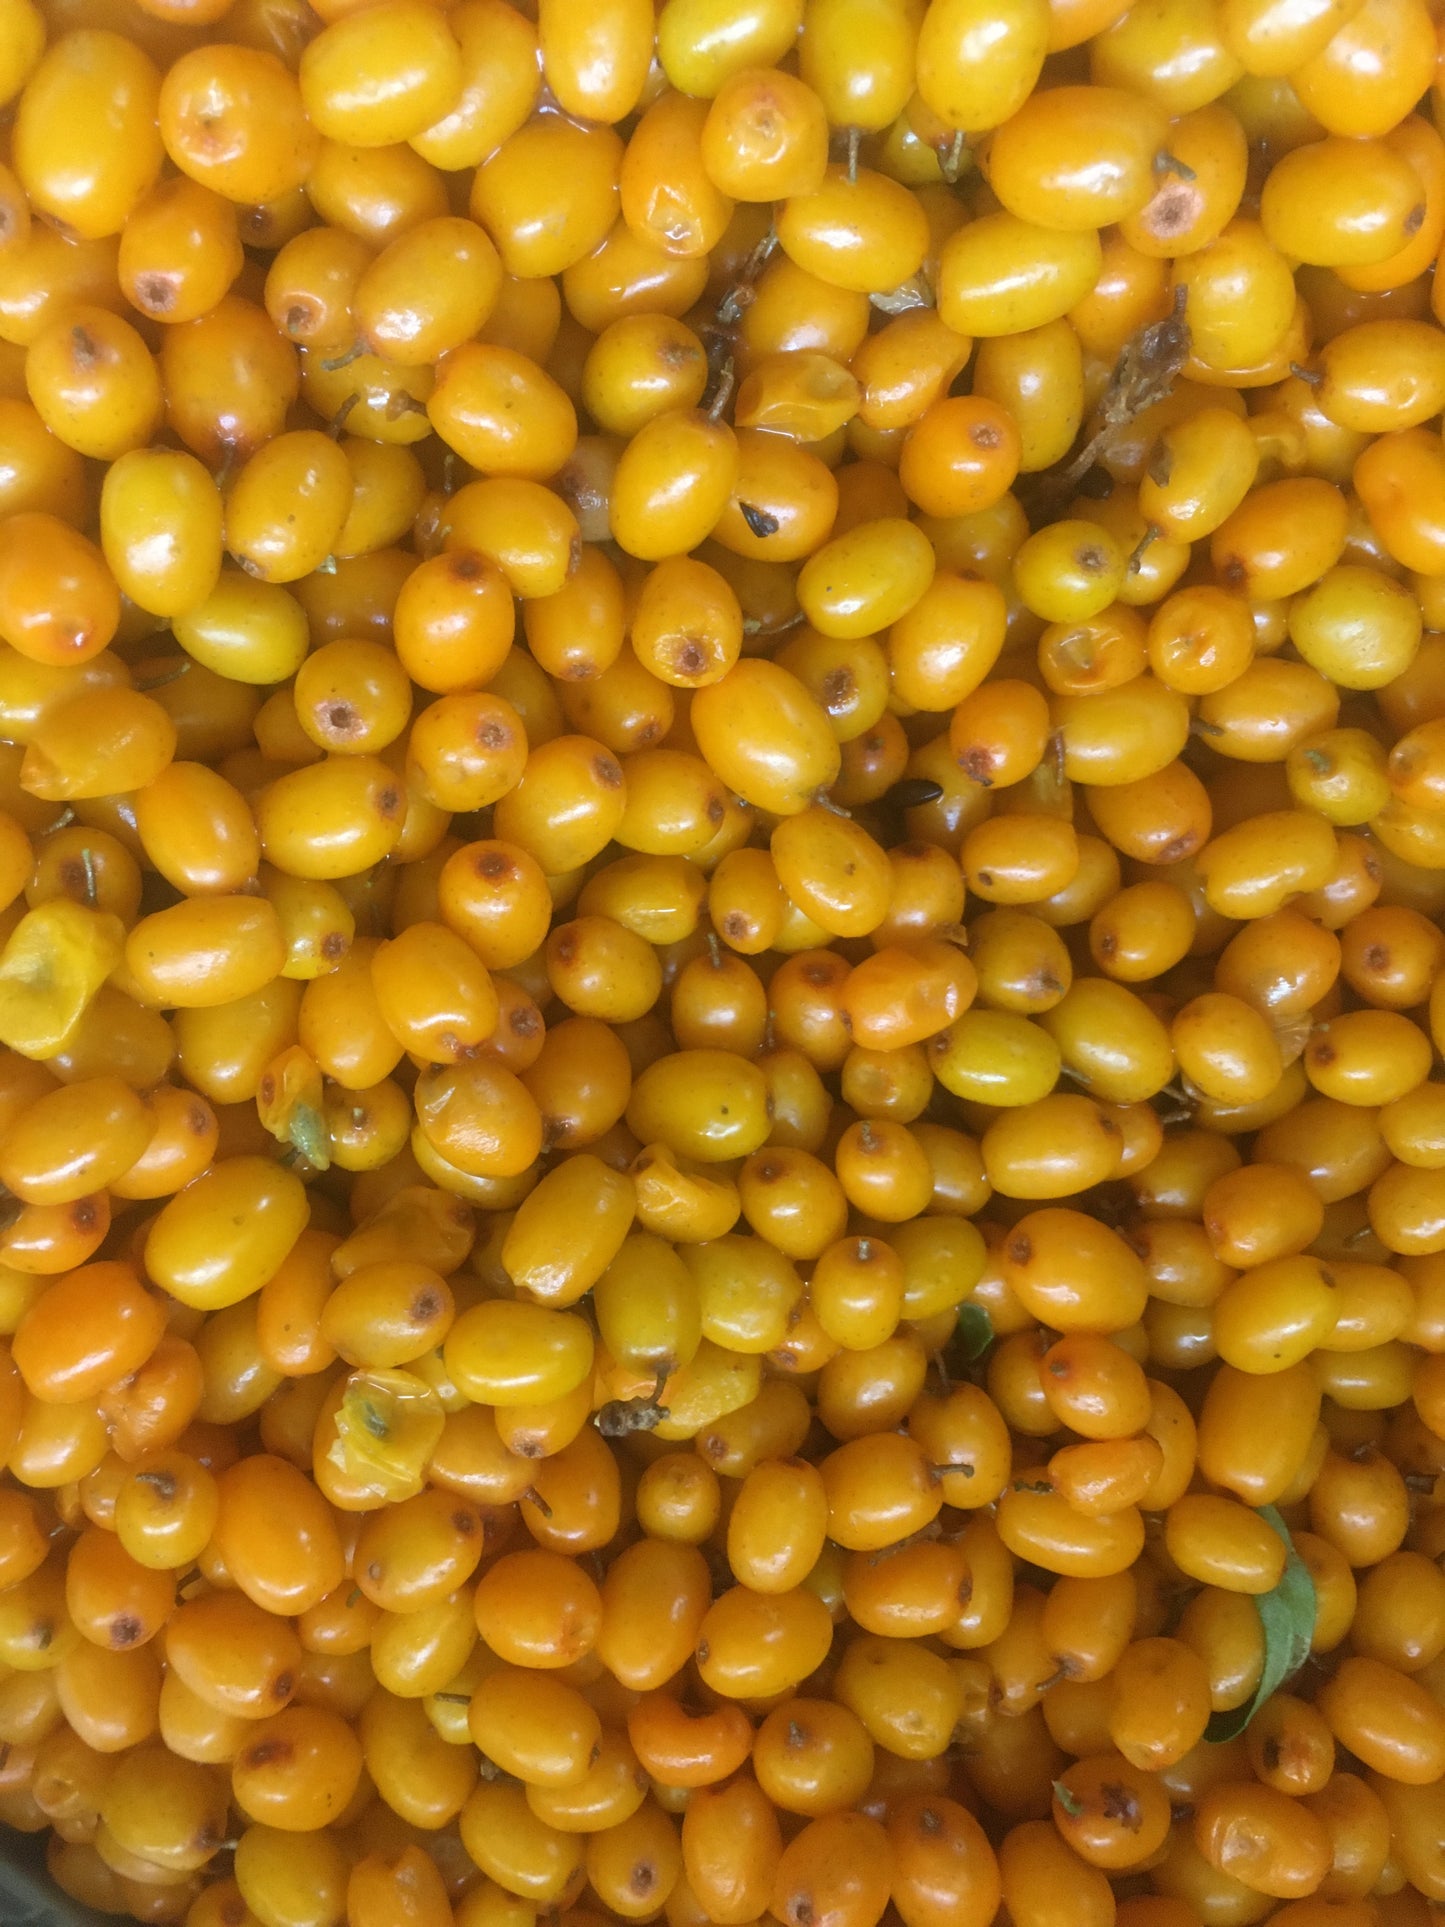 Sea buckthorn berries, by the pound